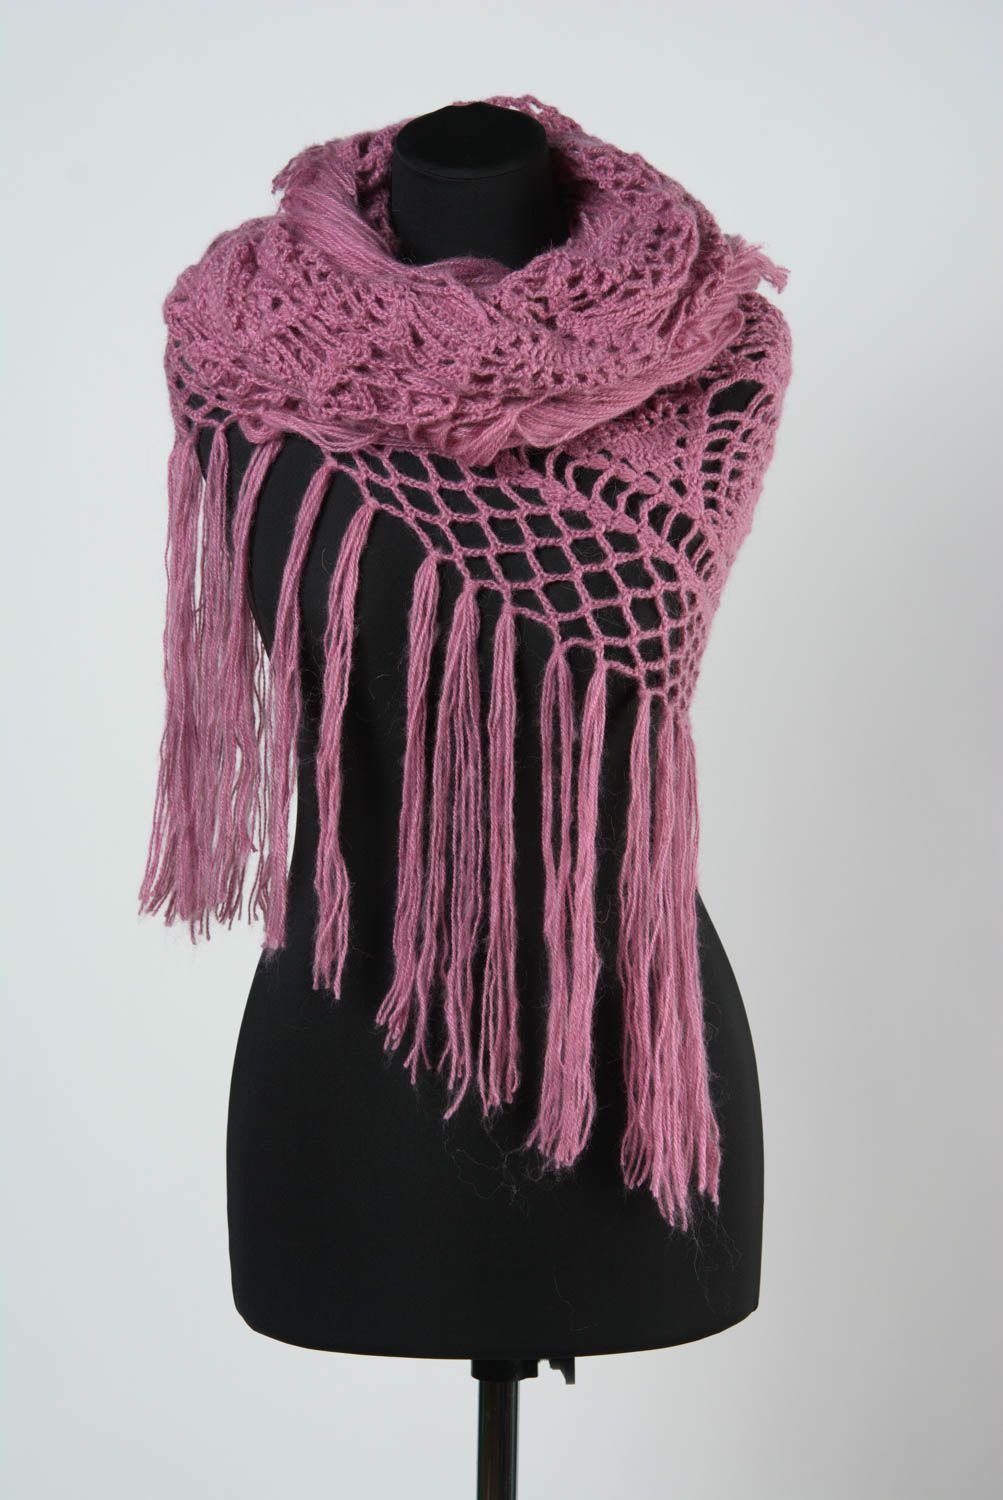 Handmade warm lace shawl knitted of woolen threads of pink color with fringe photo 1